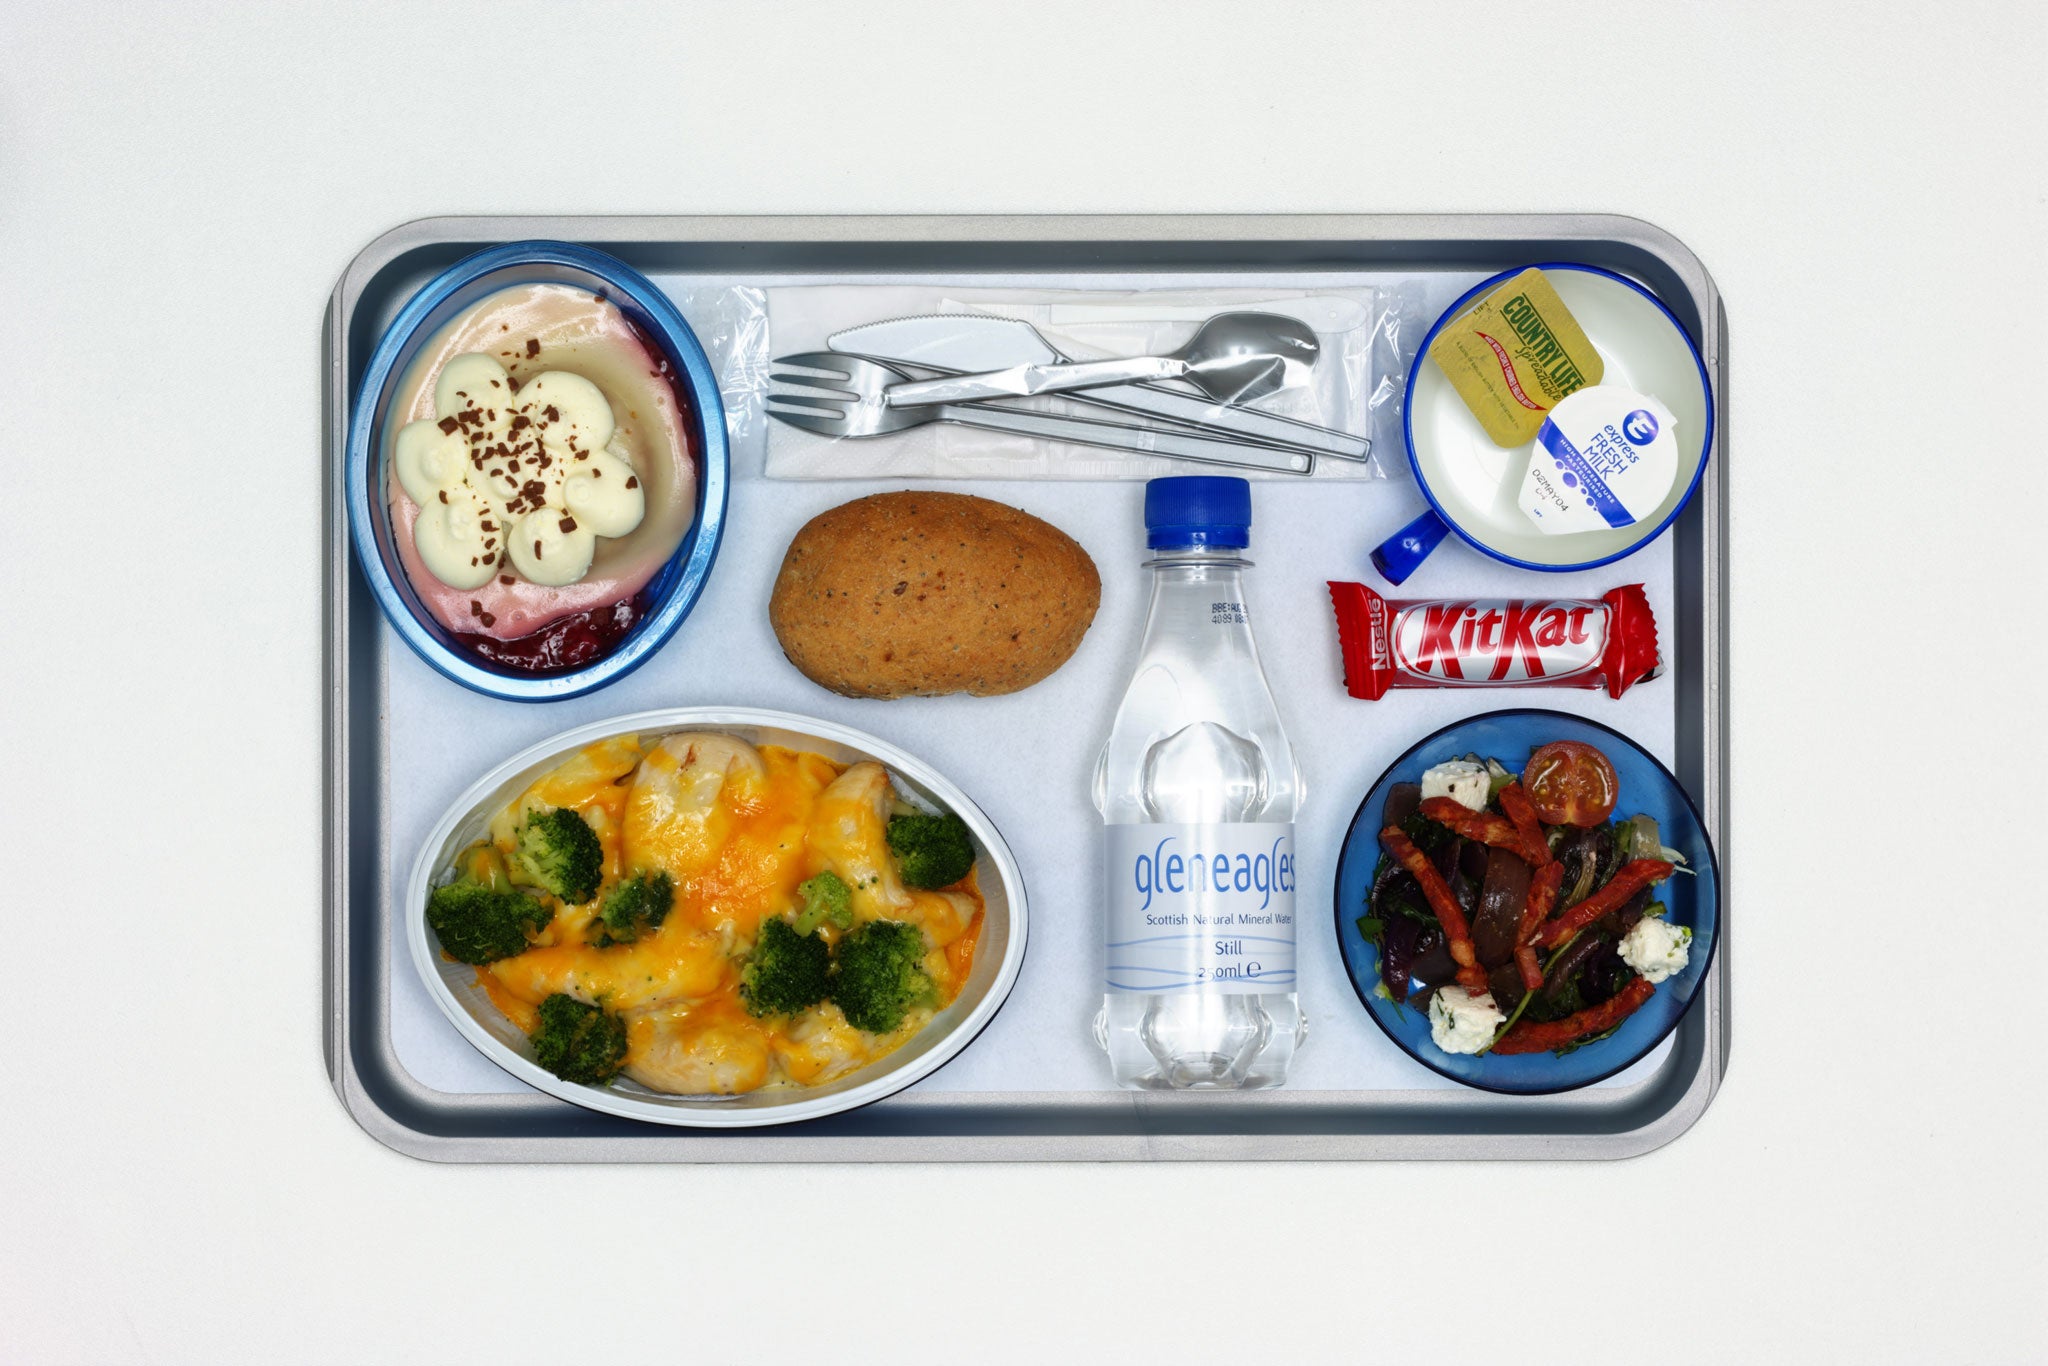 The free drinks and snacks recall the golden years of 20th-century aviation, when flying retained a dash of glamour